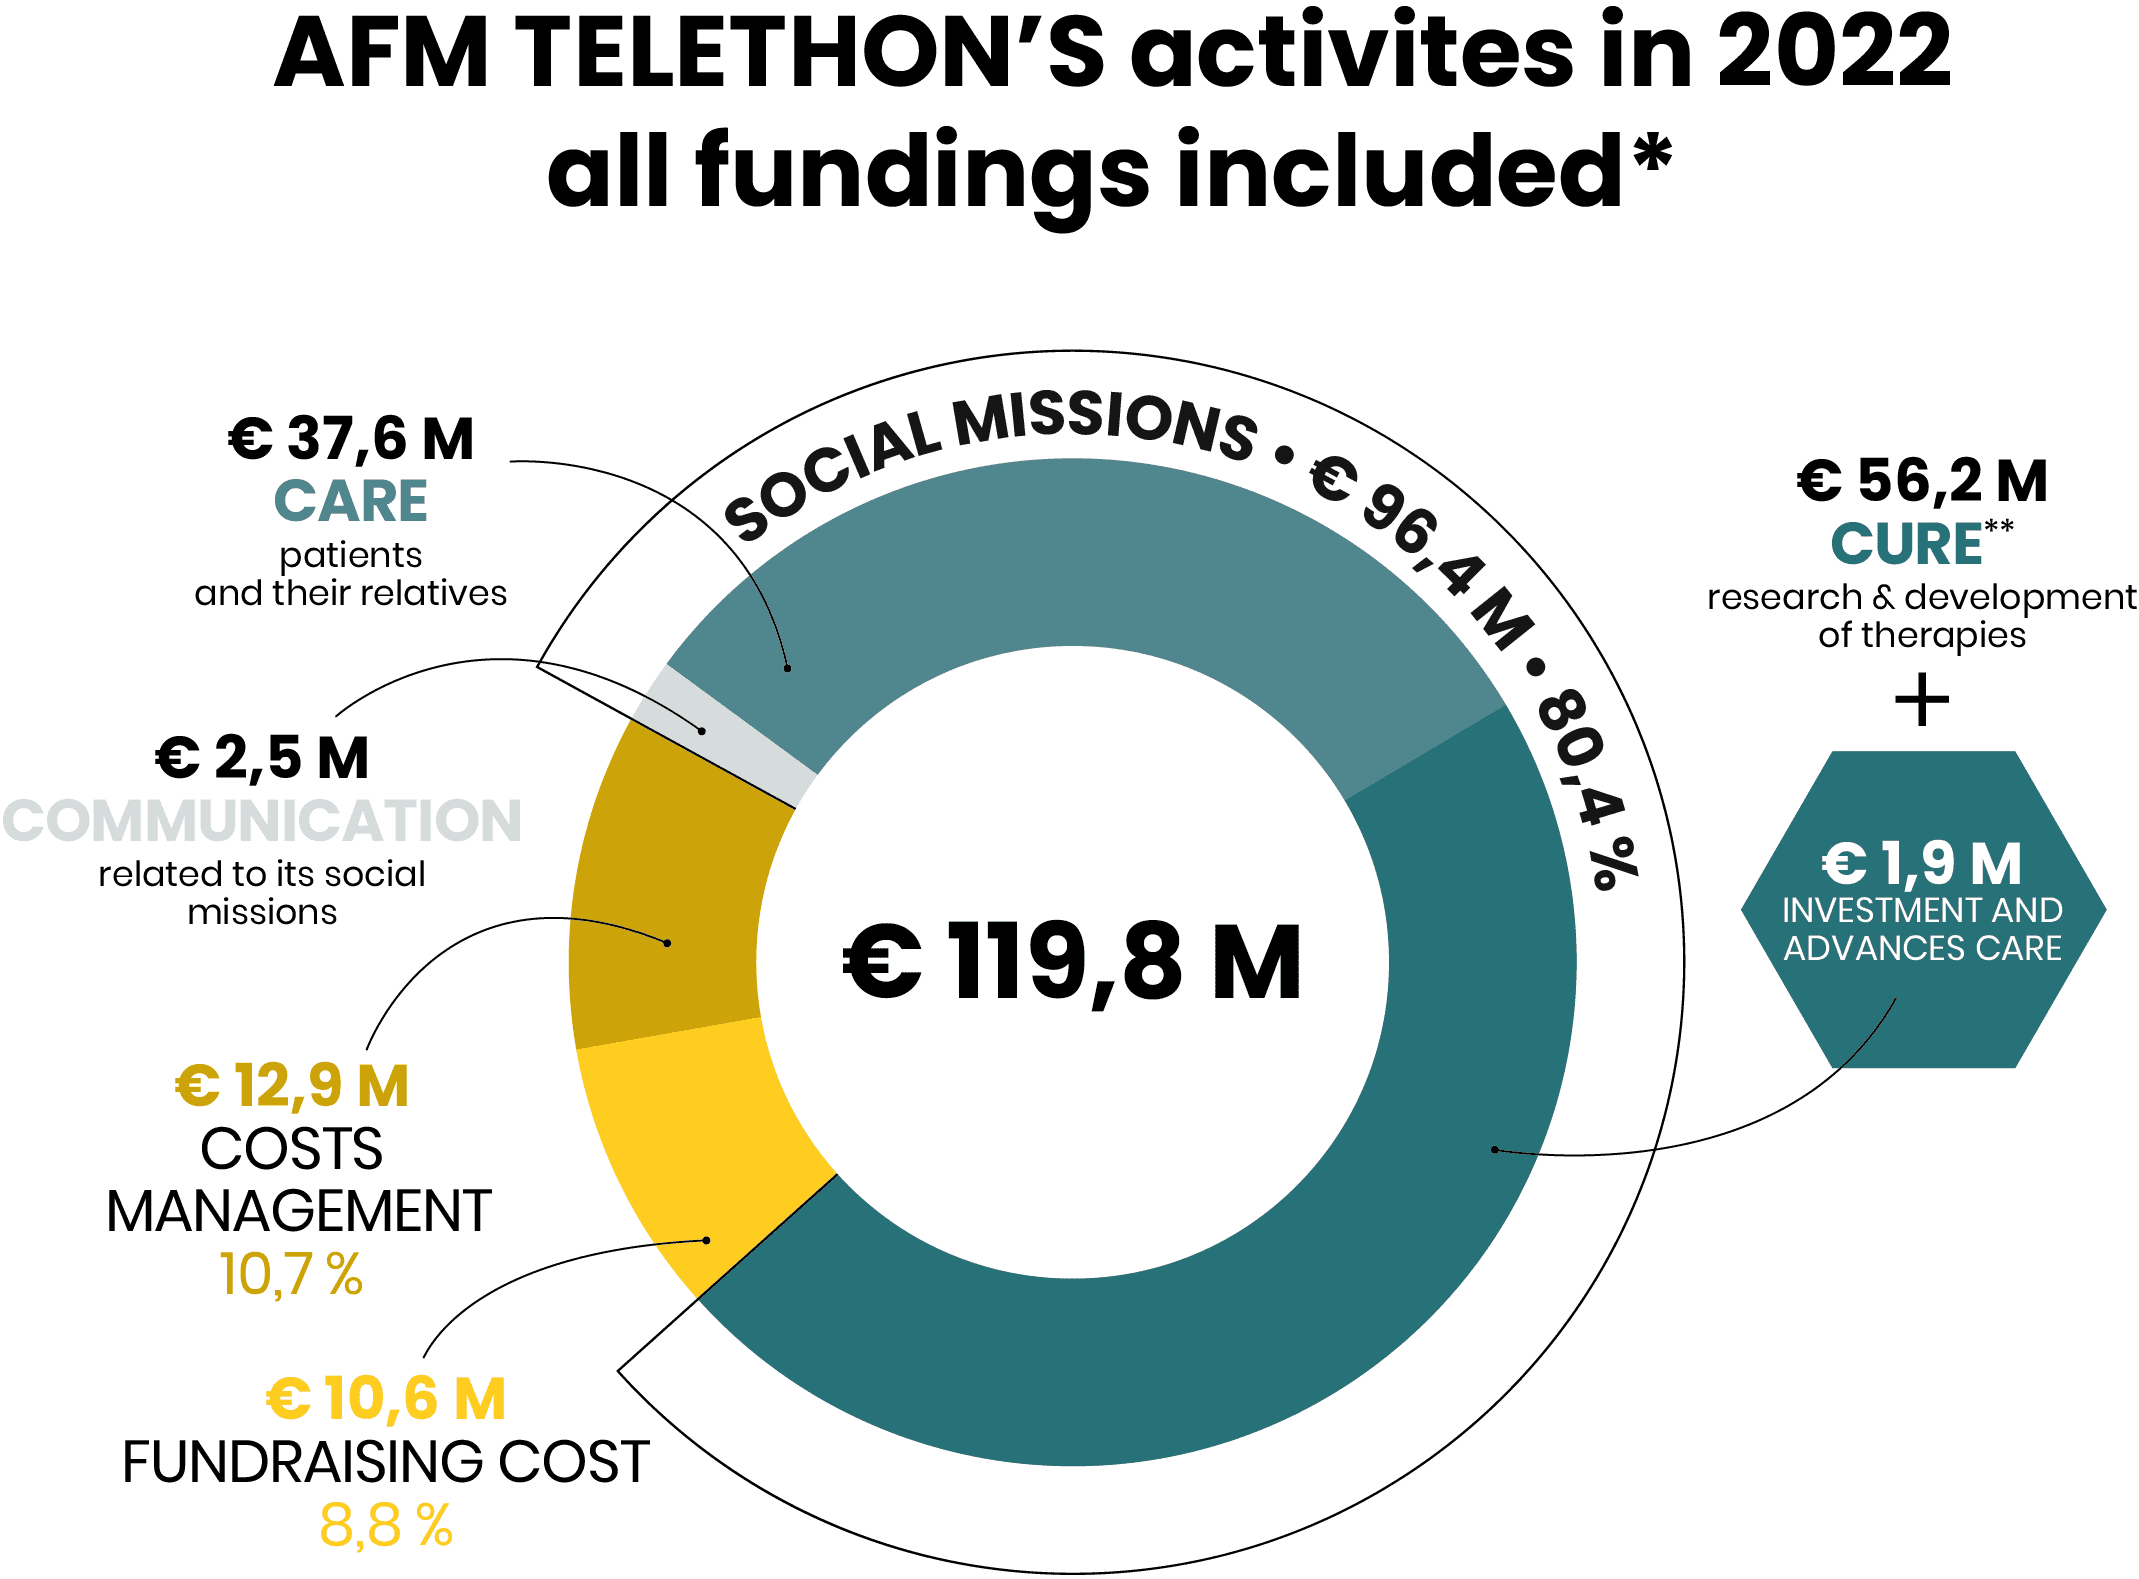 AFM-Telethon's activities in 2022 all fundings included, 119,8 M€ :
  · SOCIAL MISSIONS 96,4 M€ / 80,4%:
      - 37,6 M€ CARE for patients and their families,
      - 56,2 M€ CURE research and development of therapies,
        (+ 1,9 M€ investissements and advances)
      - 2,5 M€ COMMUNICATE related to its missions,
  · 12,9 M€ / 10,7 % FUNDRAISING COSTS,
  · 10,6 M€ / 8,8 % MANAGEMENT COSTS